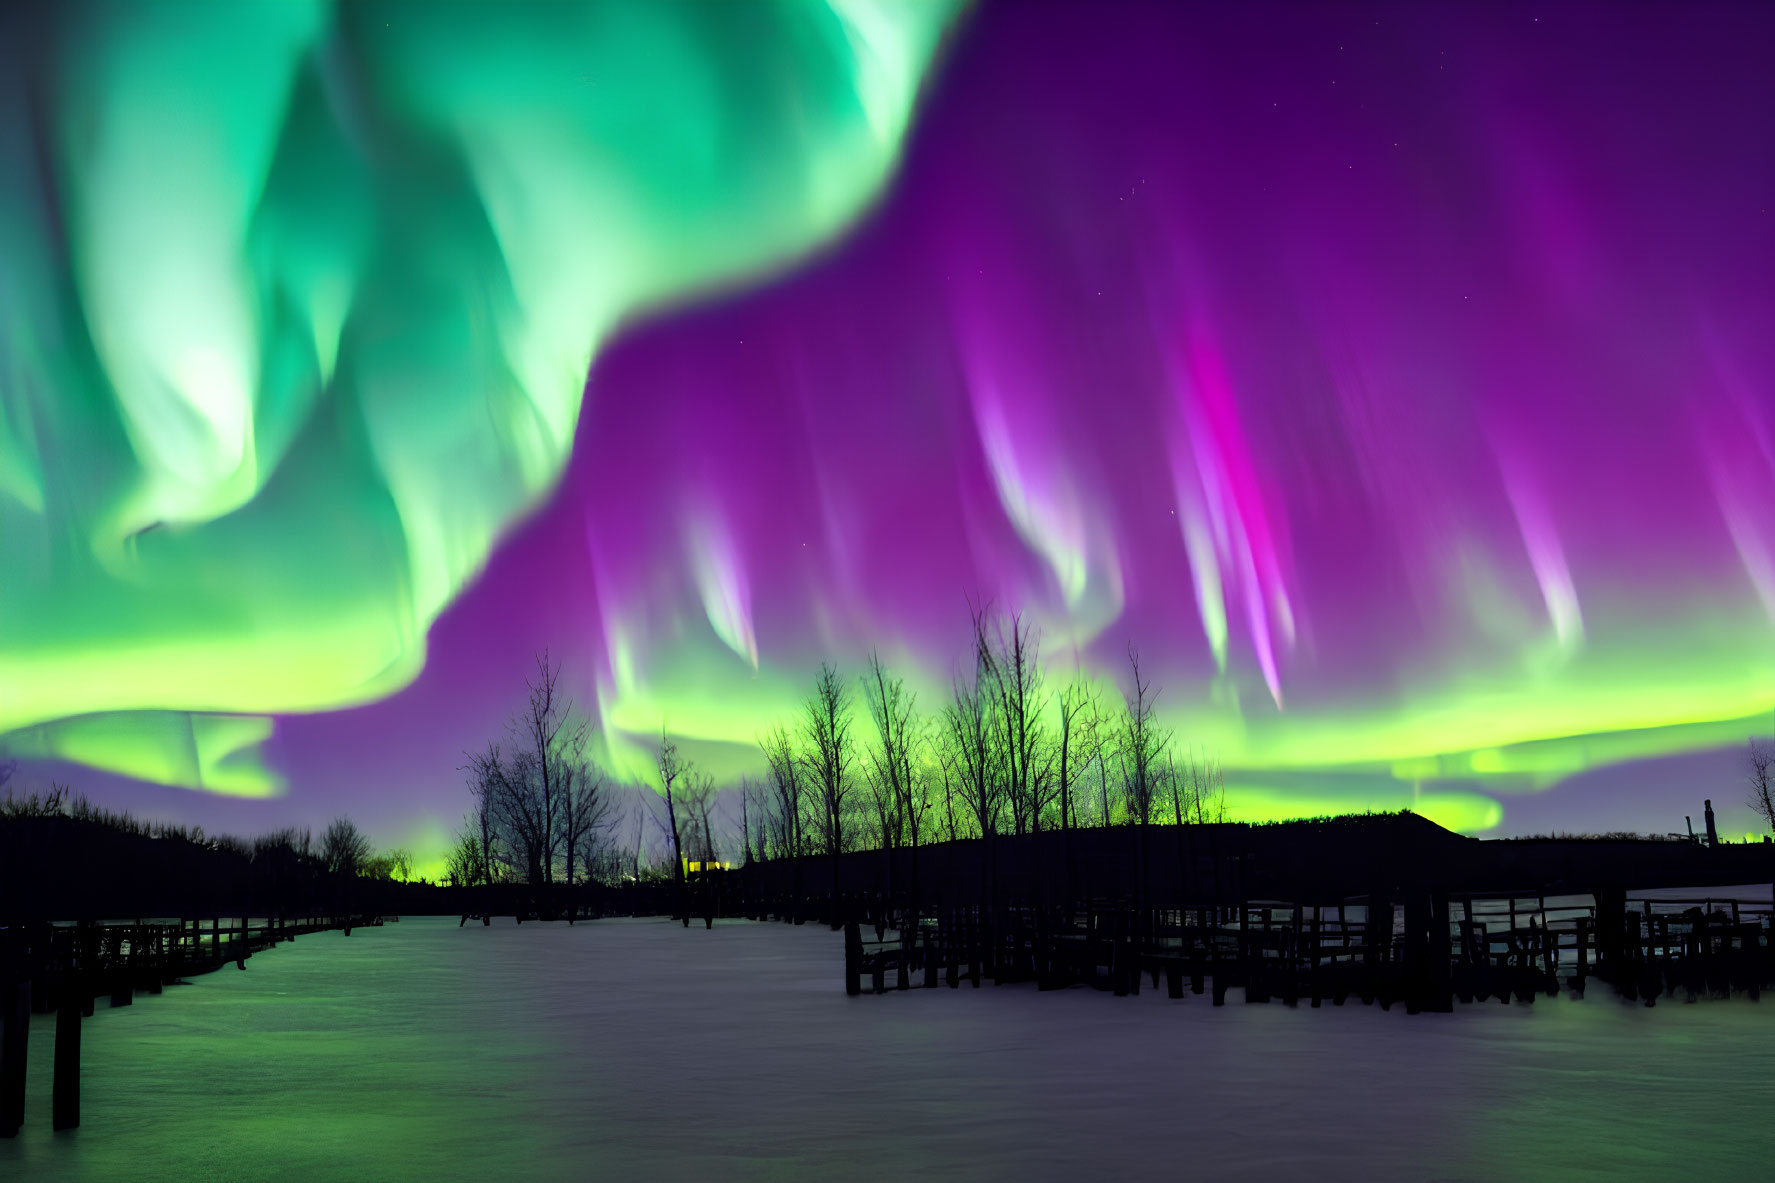 Northern Lights in Green and Purple Dance Over Snowy Landscape